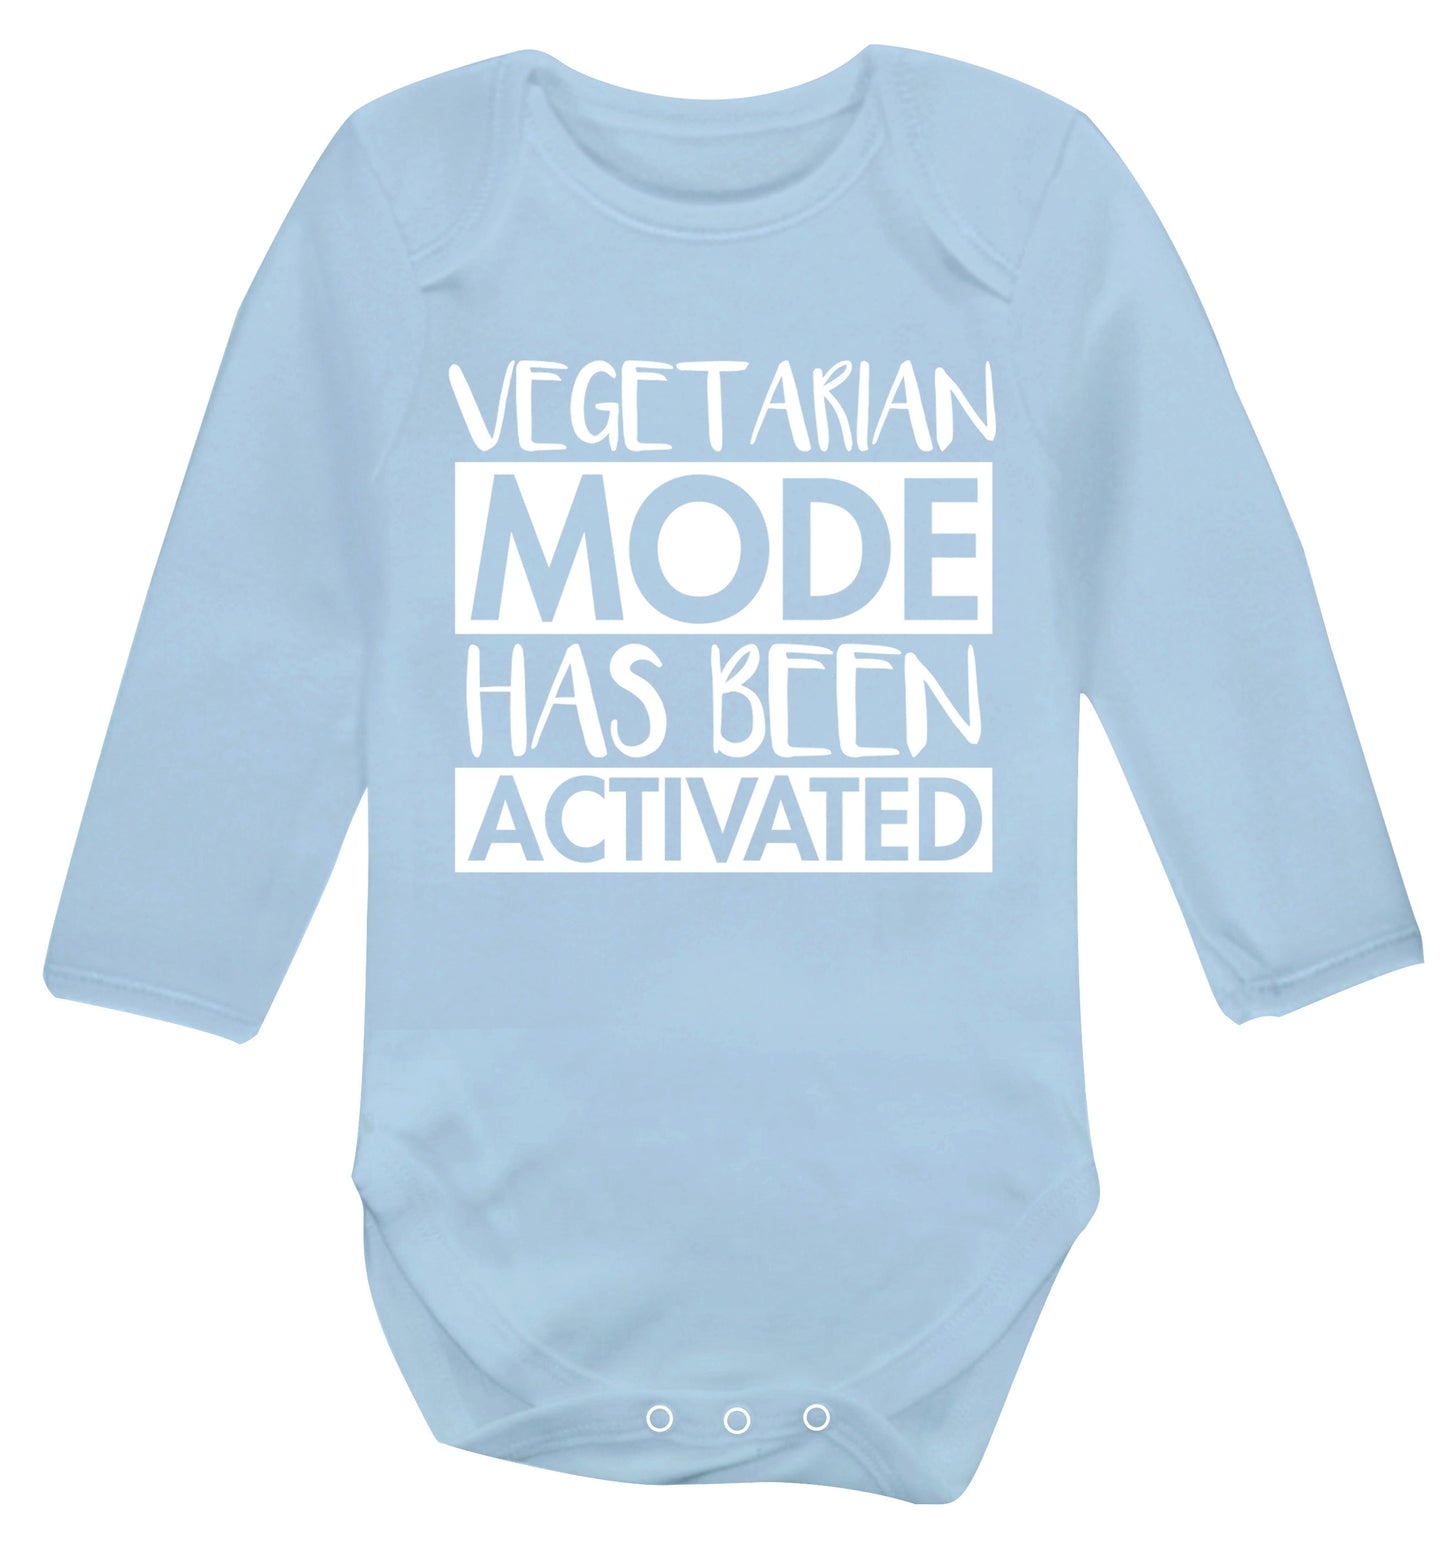 Vegetarian mode activated Baby Vest long sleeved pale blue 6-12 months